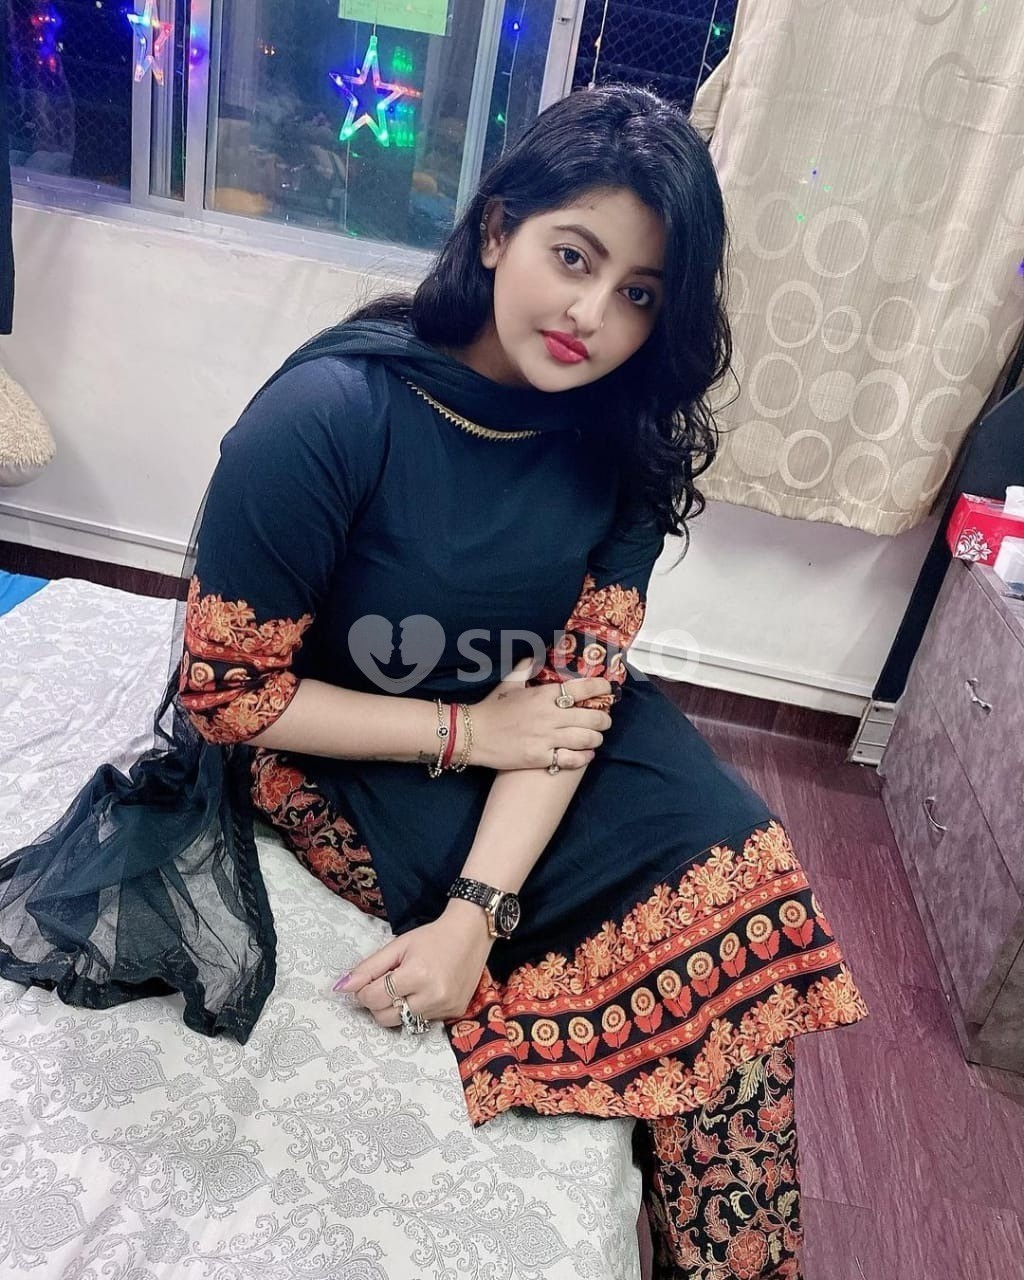 Sangli Shivani p Low price 100% genuine 👥 sexy VIP call girls are provided👌safe and secure service .call 📞,,24 